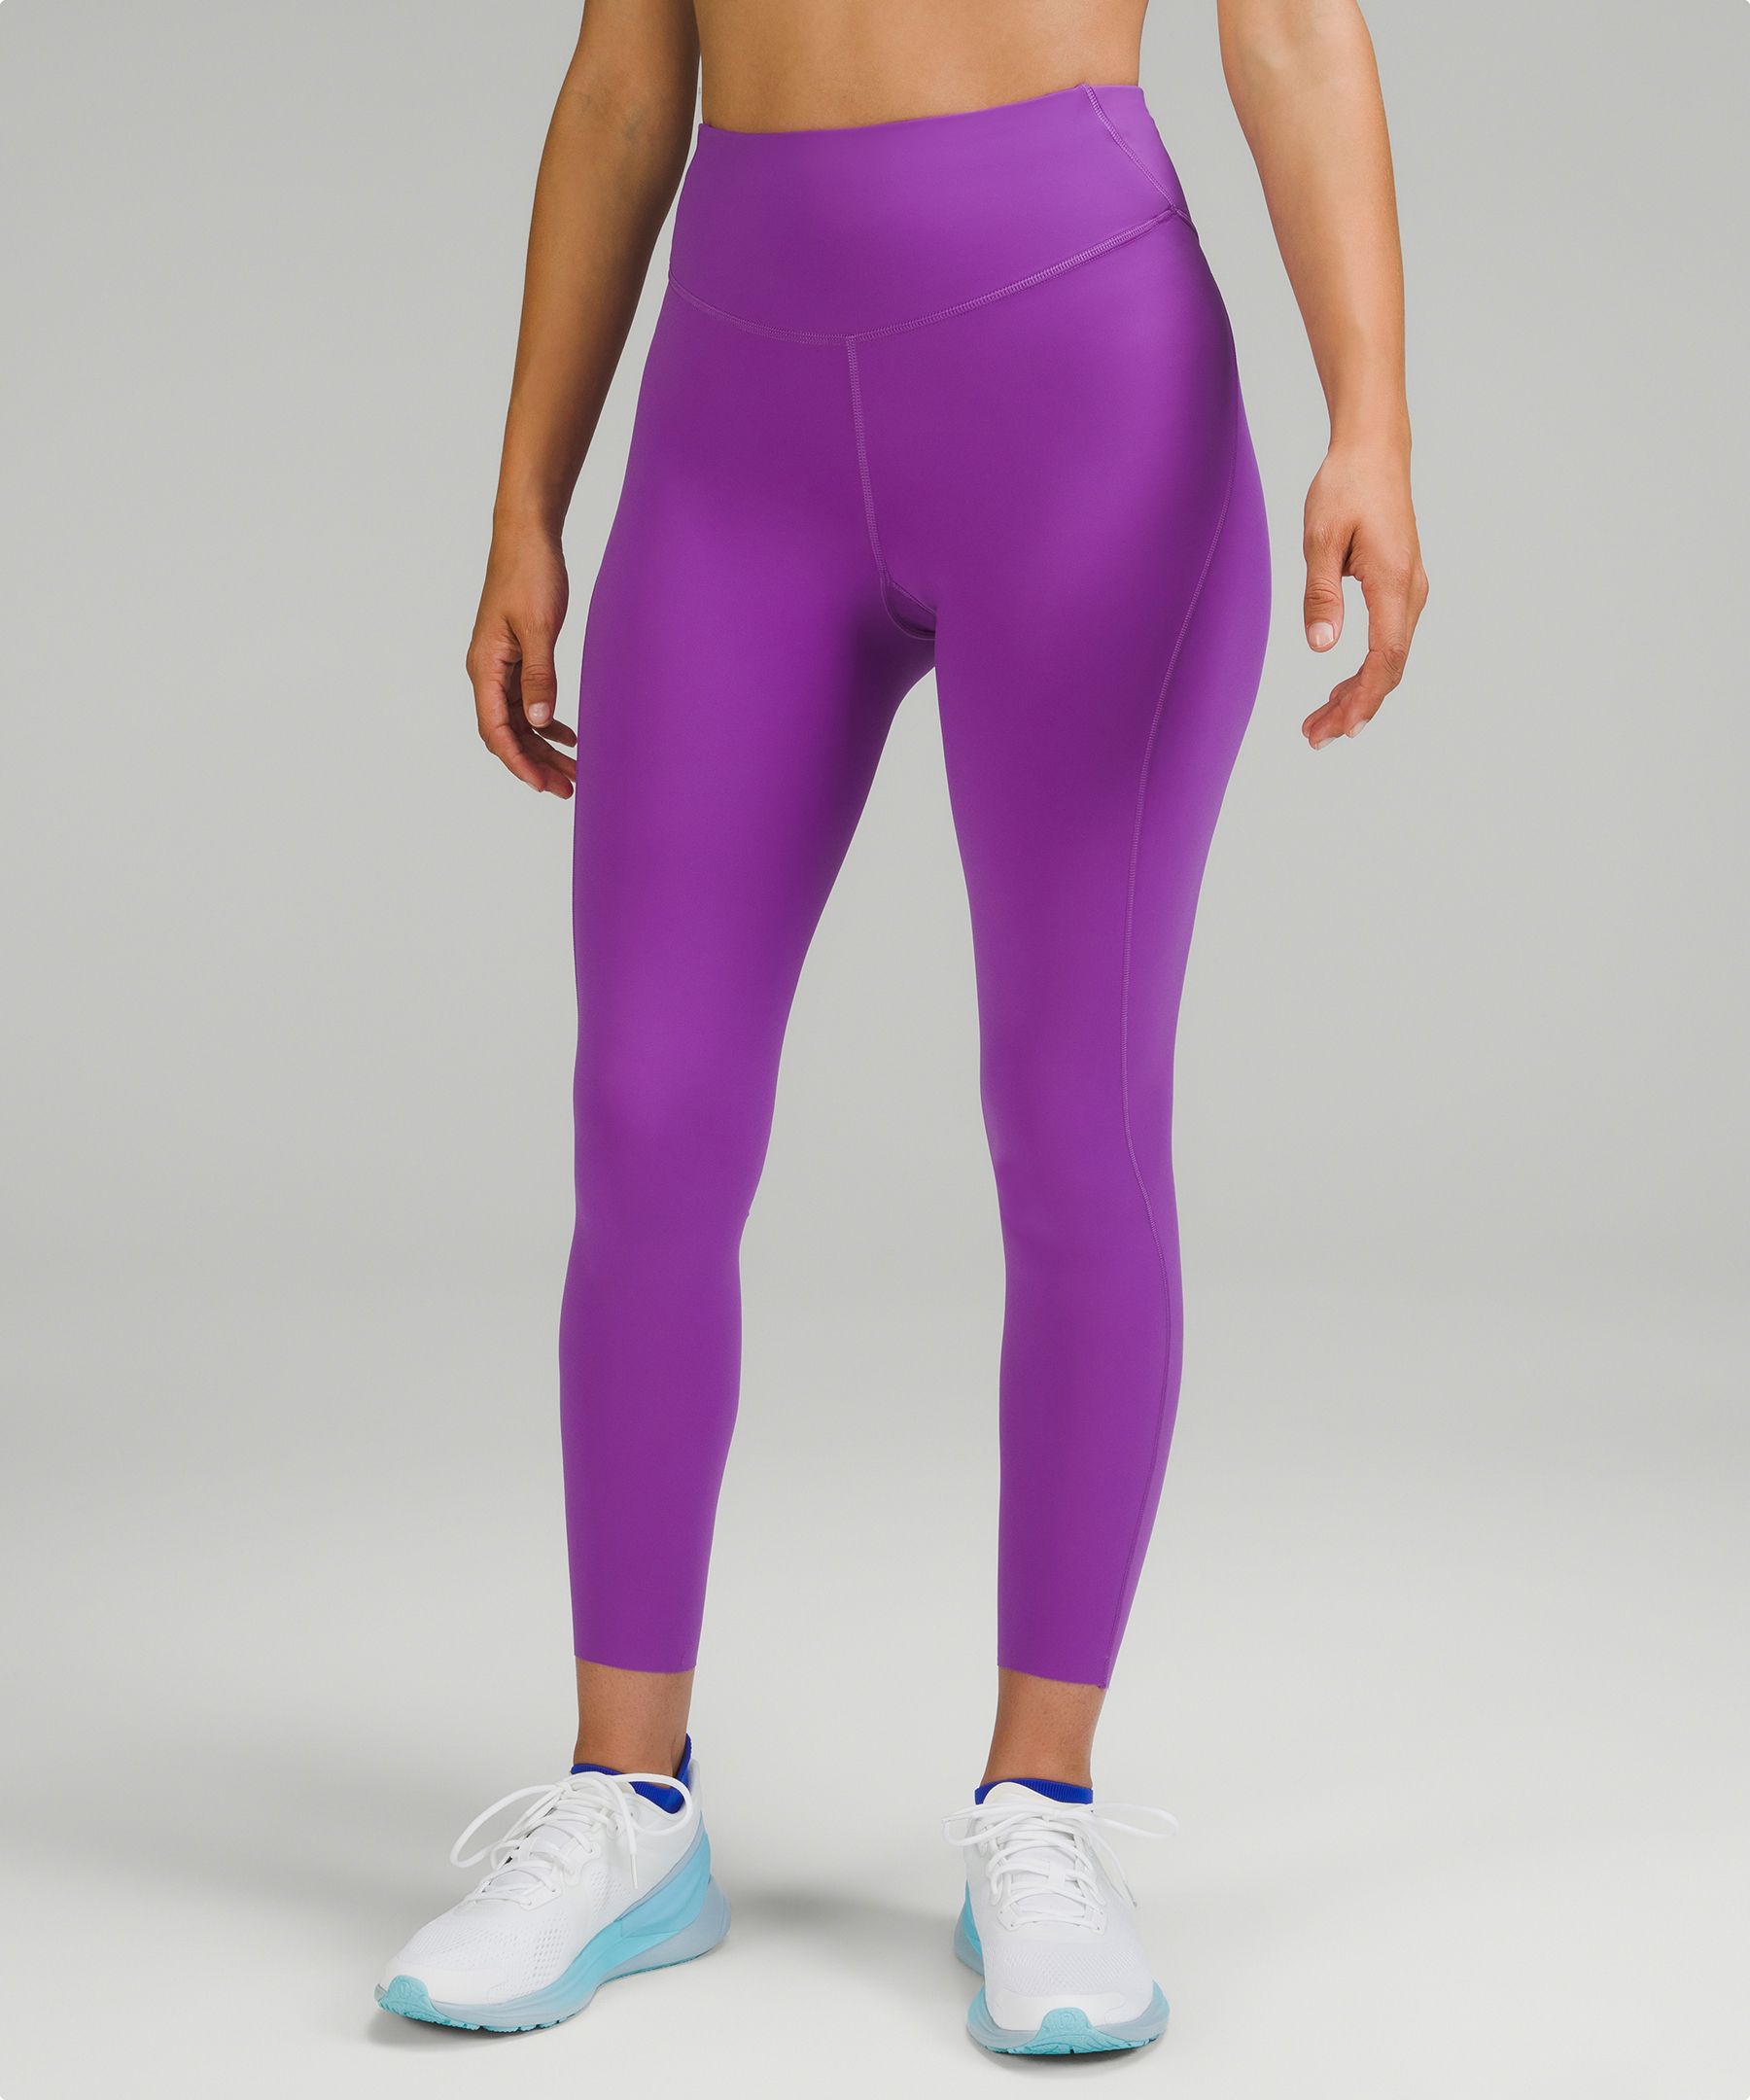 Lululemon Base Pace High-rise Running Tights 25"